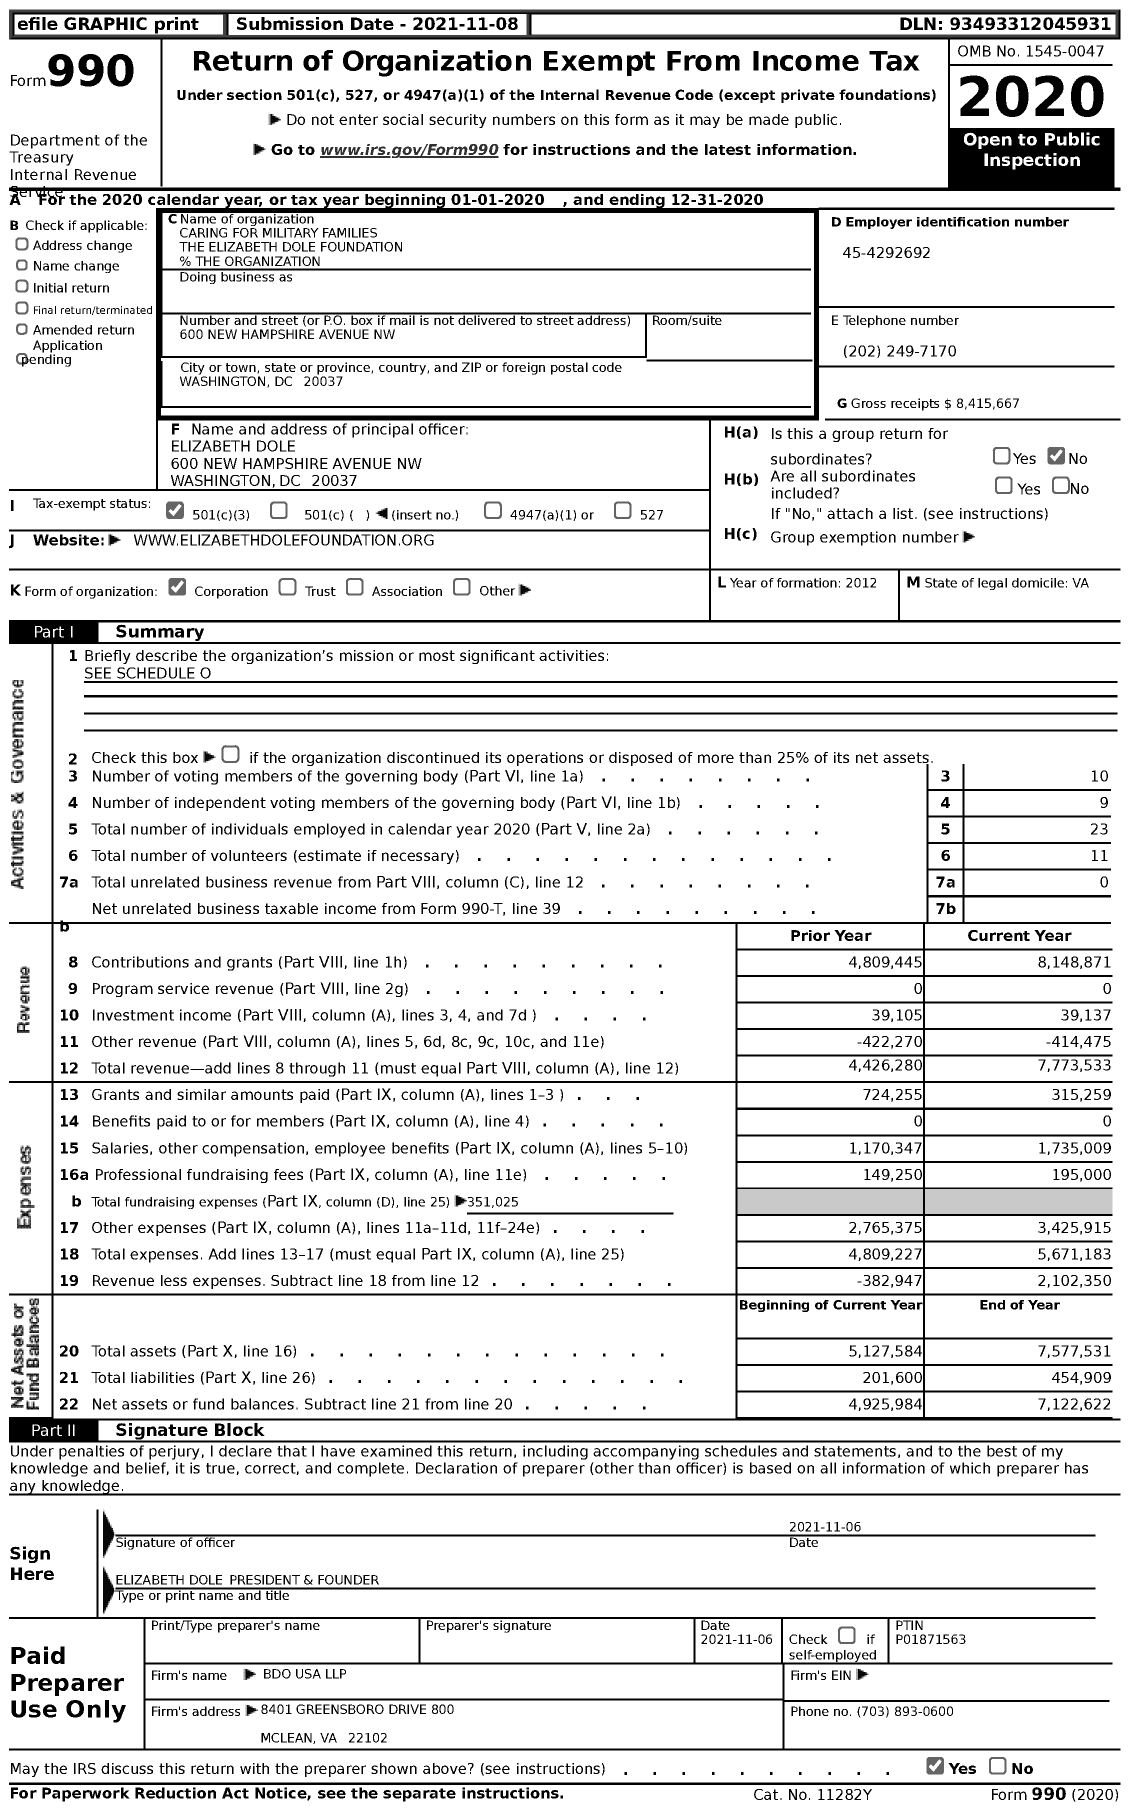 Image of first page of 2020 Form 990 for Caring for Military Families The Elizabeth Dole Foundation